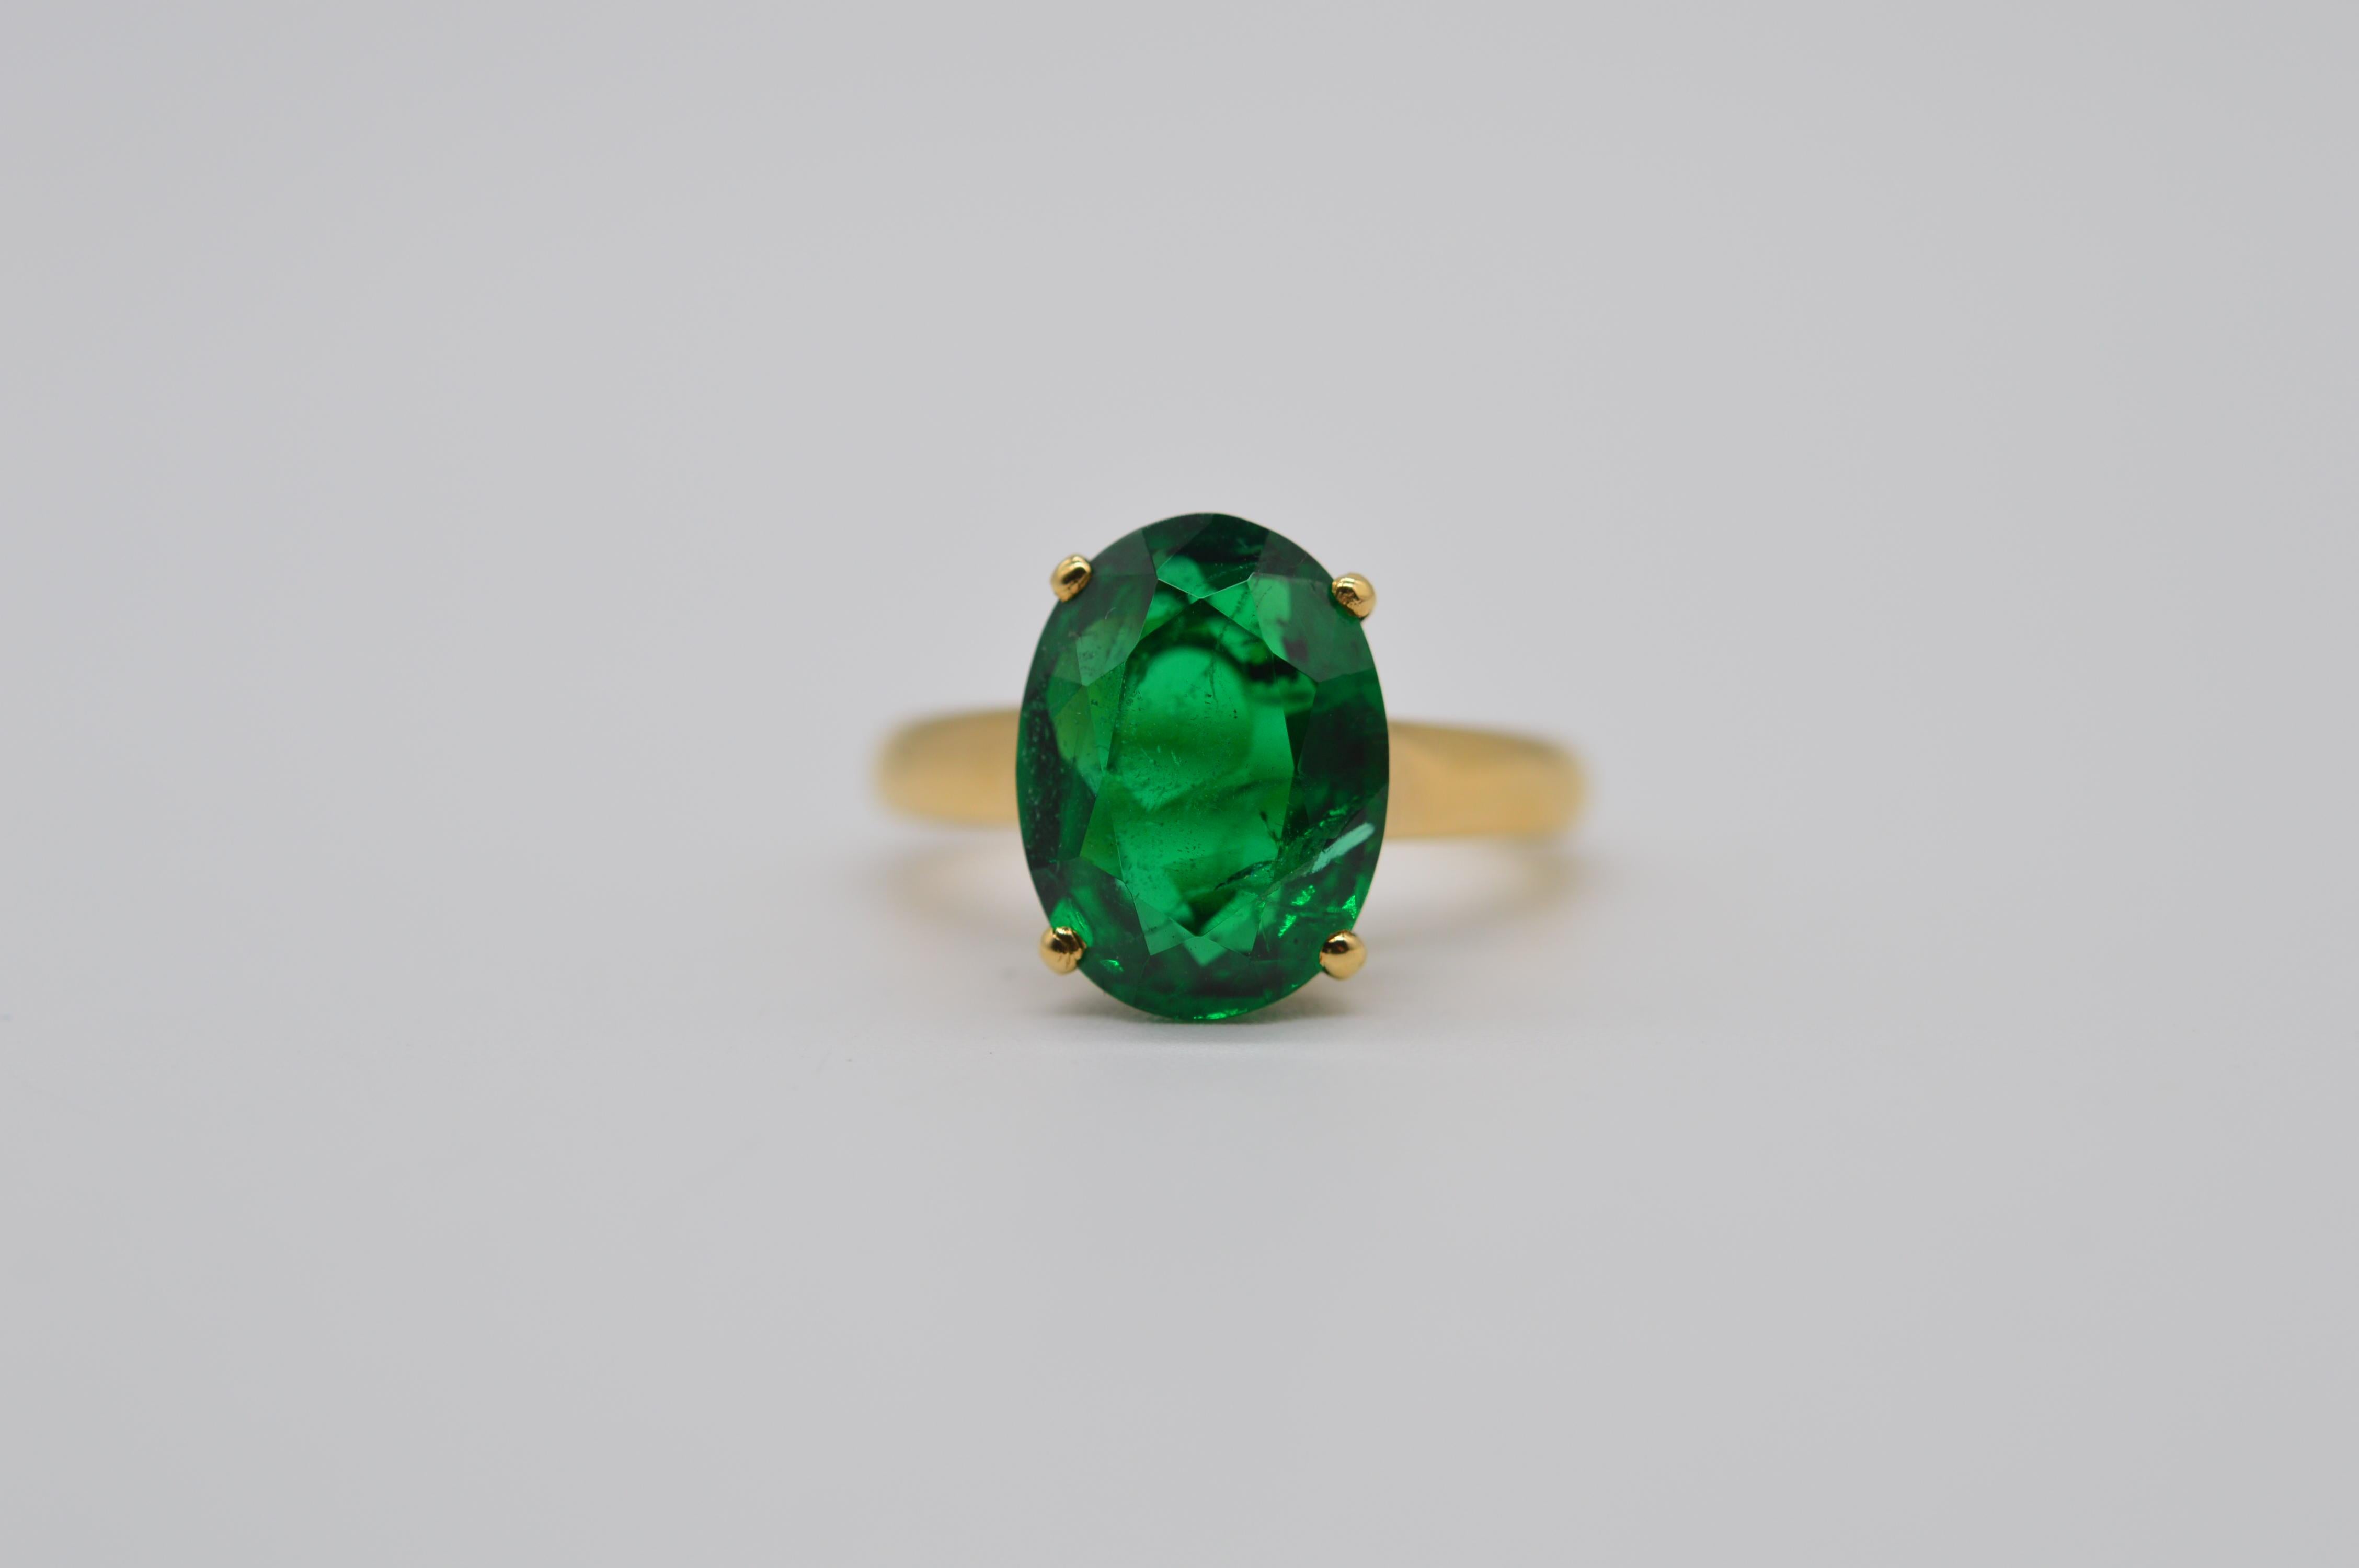 A stunning Zambian Oval Emerald 4.99 carats ring Unworn
Mounted in an 18K Yellow Gold ring signed by 